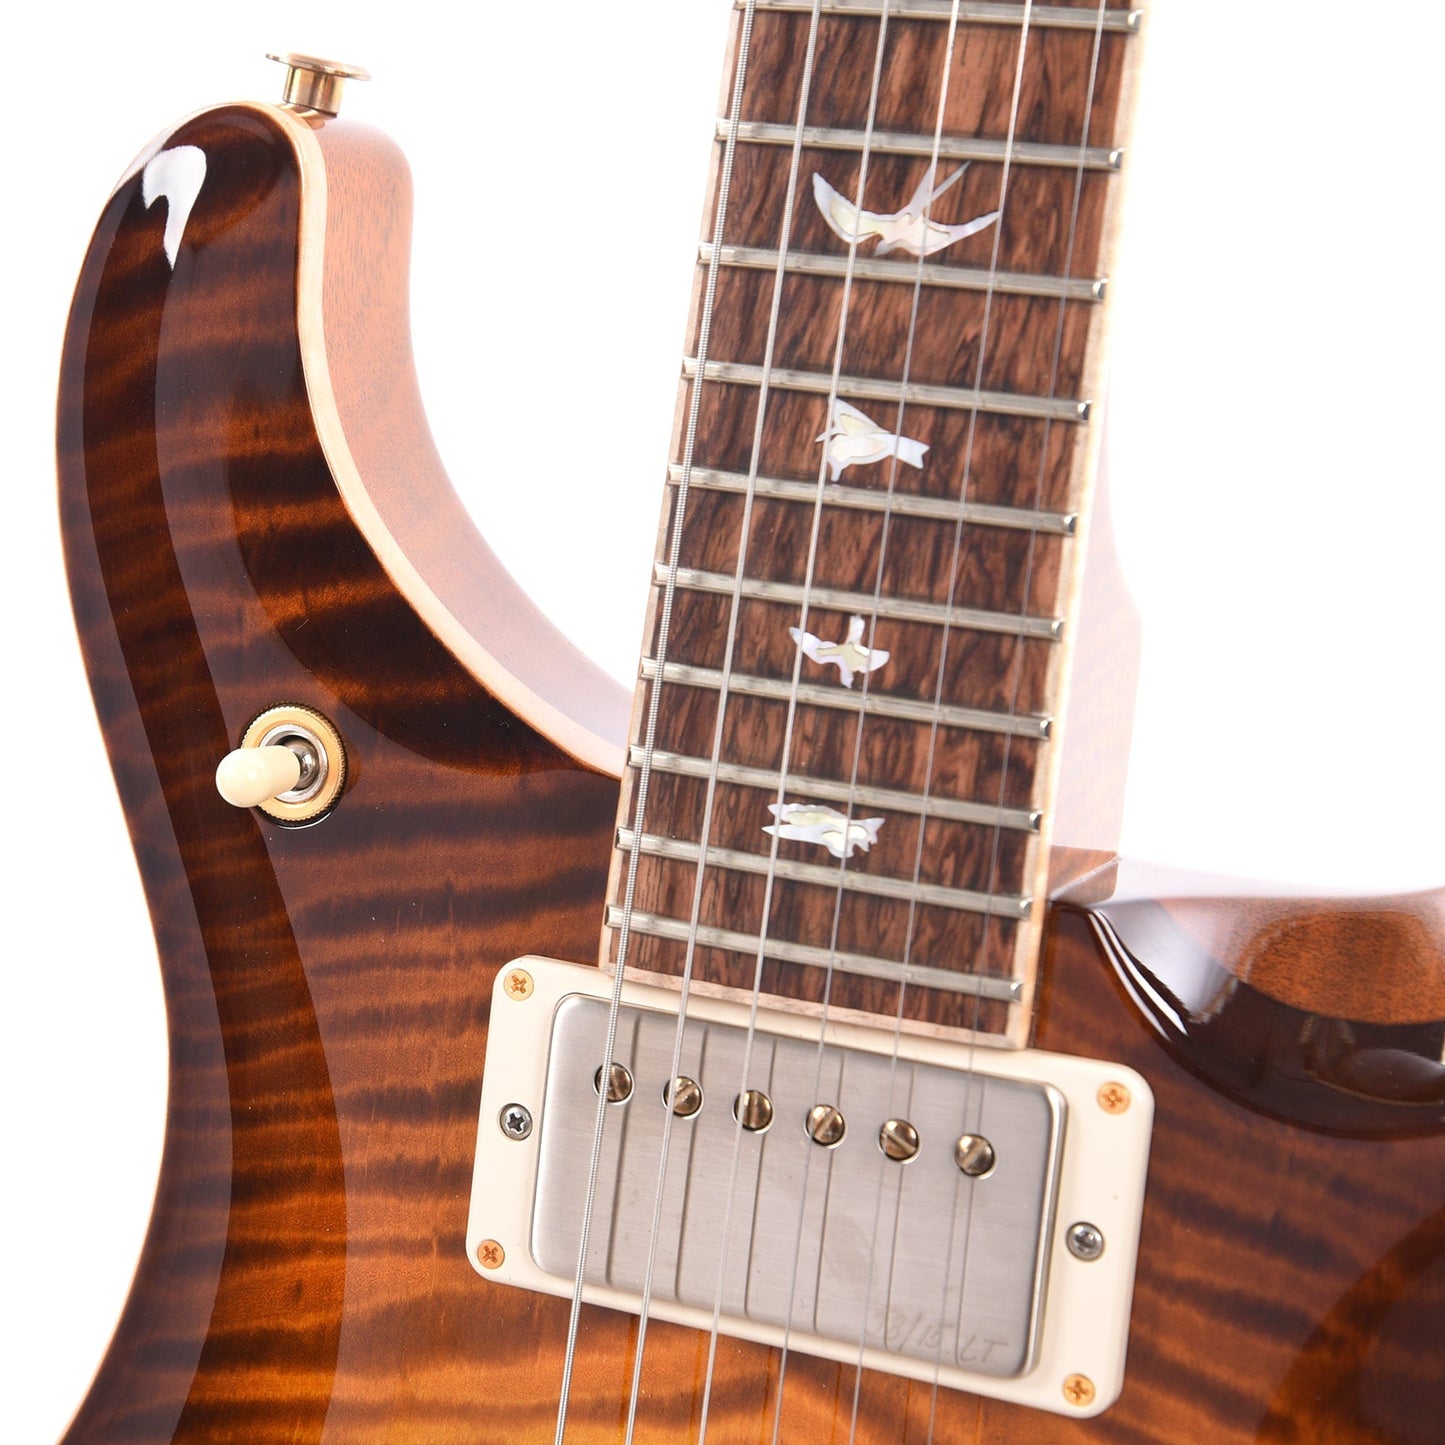 PRS Private Stock #10452 McCarty 594 McCarty Glow Curly Maple w/Figured Mahogany Neck & Honduran Rosewood Fingerboard Electric Guitars / Solid Body